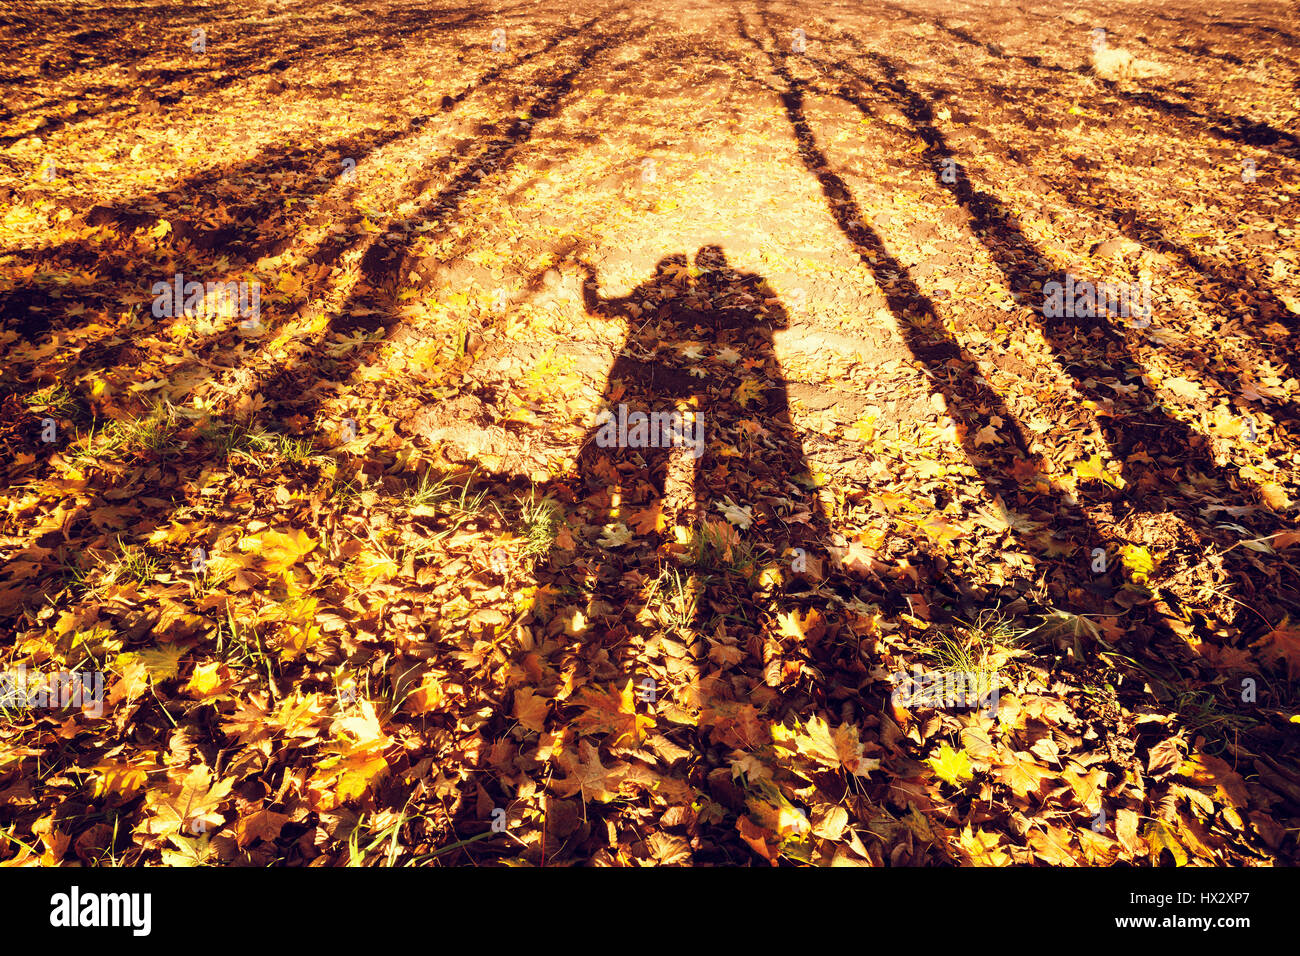 bright landscape with long tree and human shadows on the ground covered by yellow foliage Stock Photo